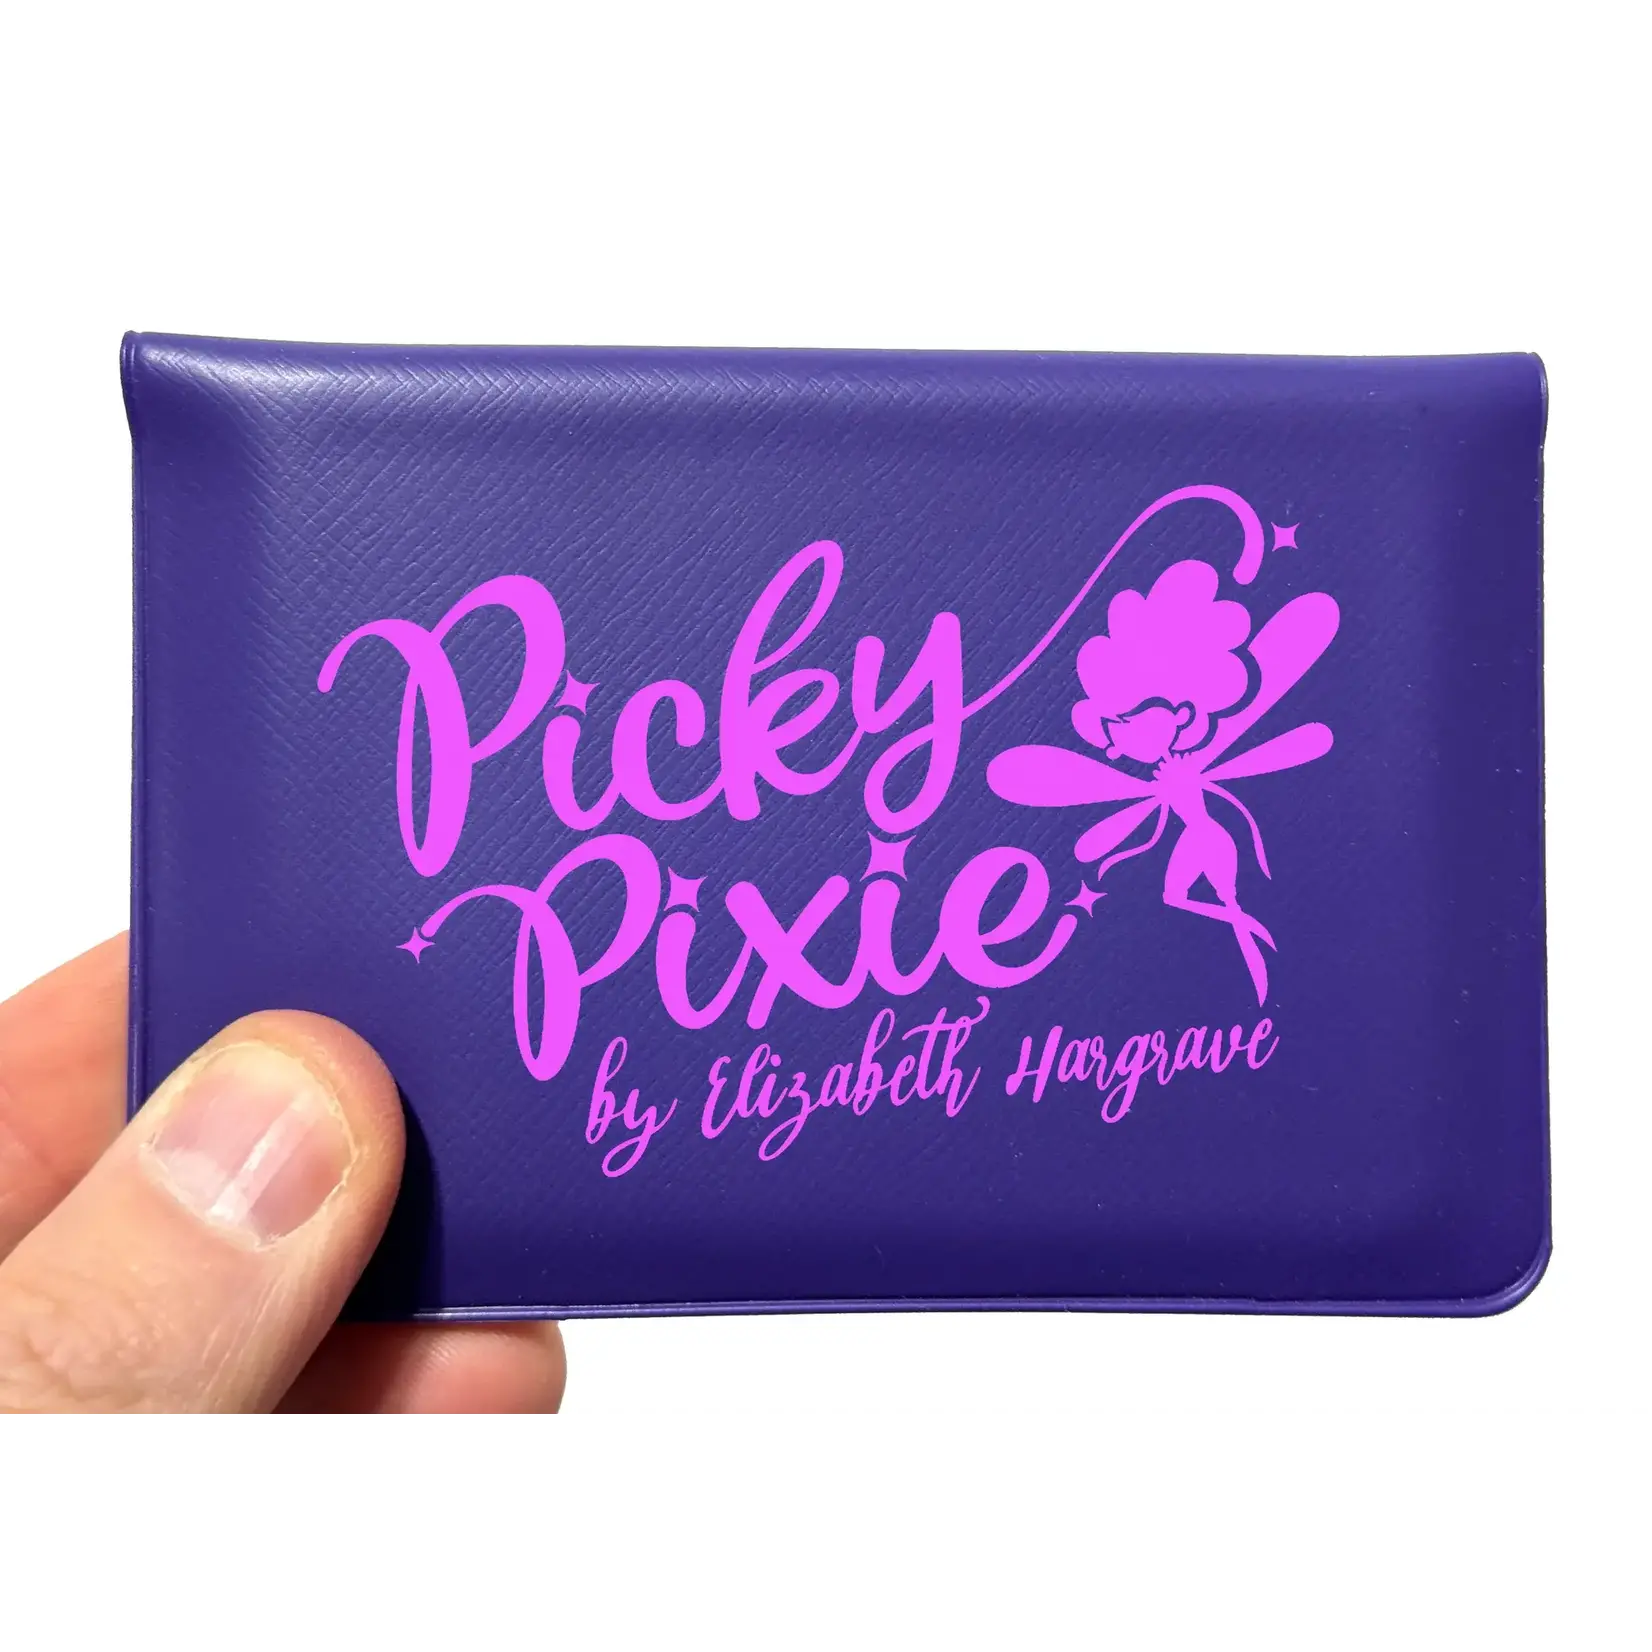 Button Shy Games Picky Pixie